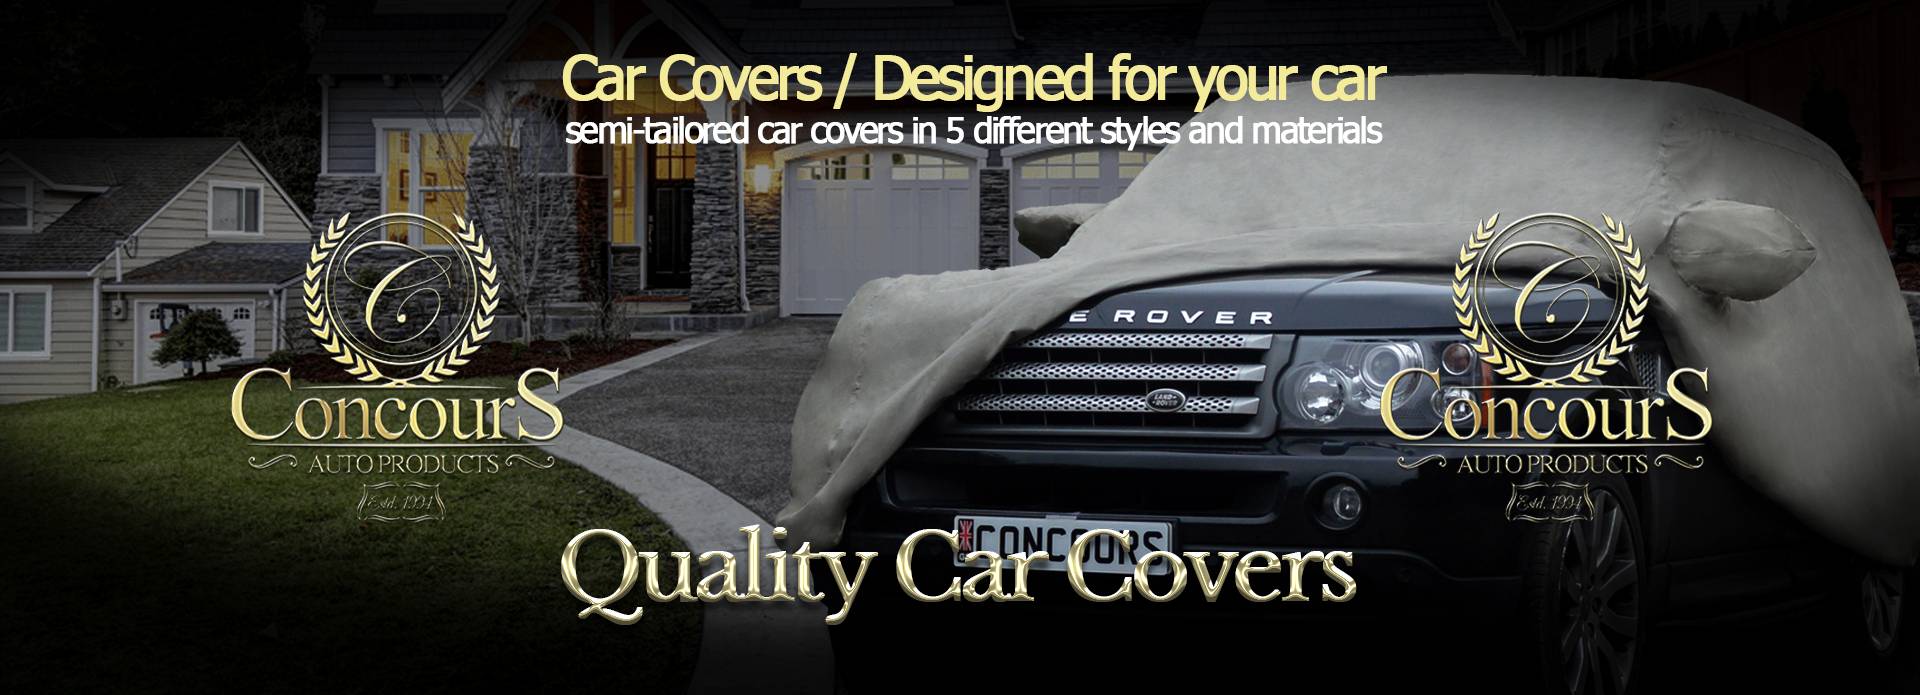 1989 Nissan Micra Car Covers